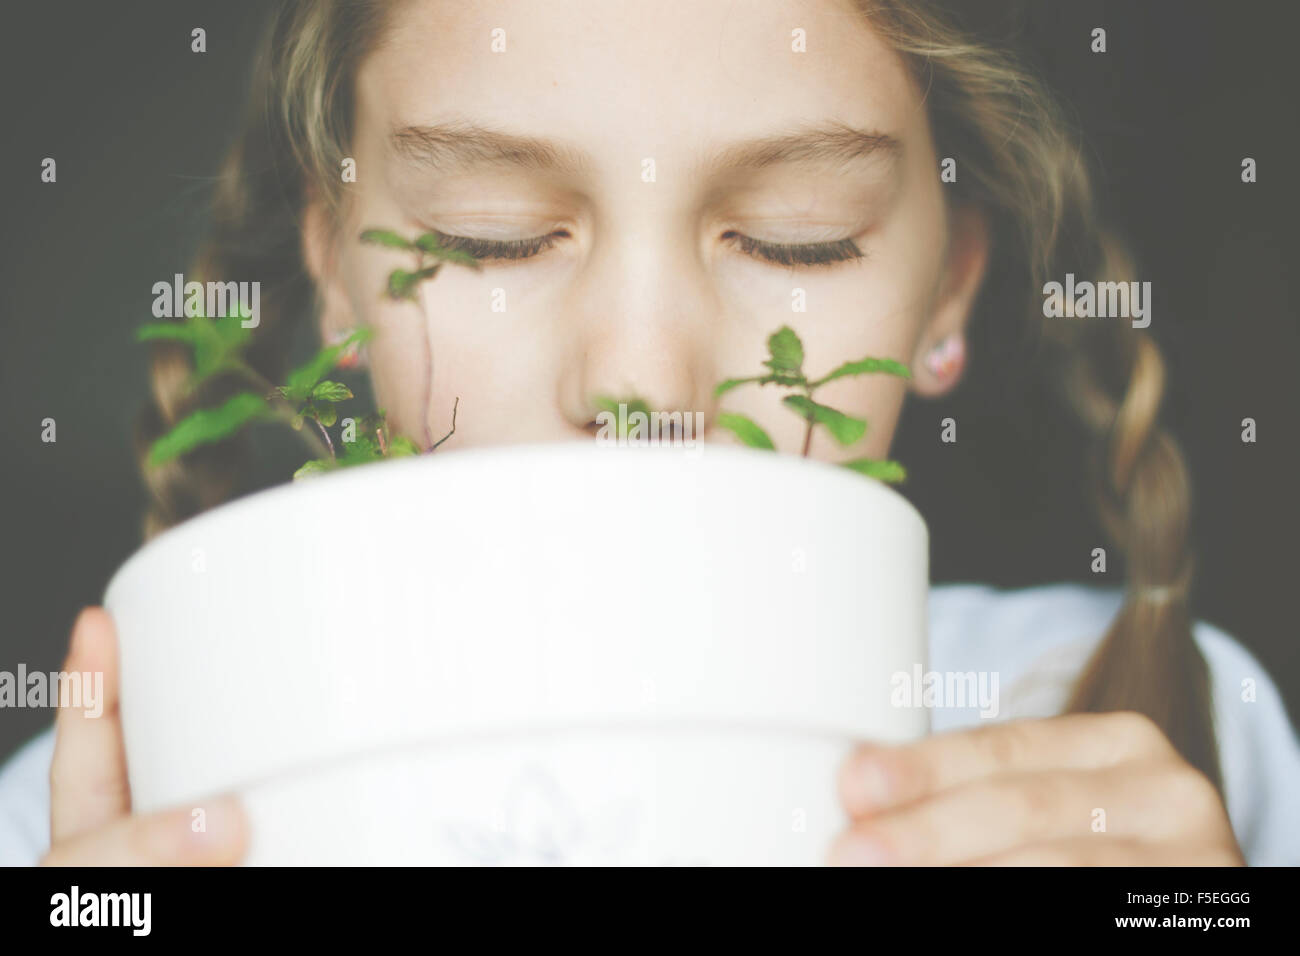 Girl smelling mint plant in a plant pot Stock Photo